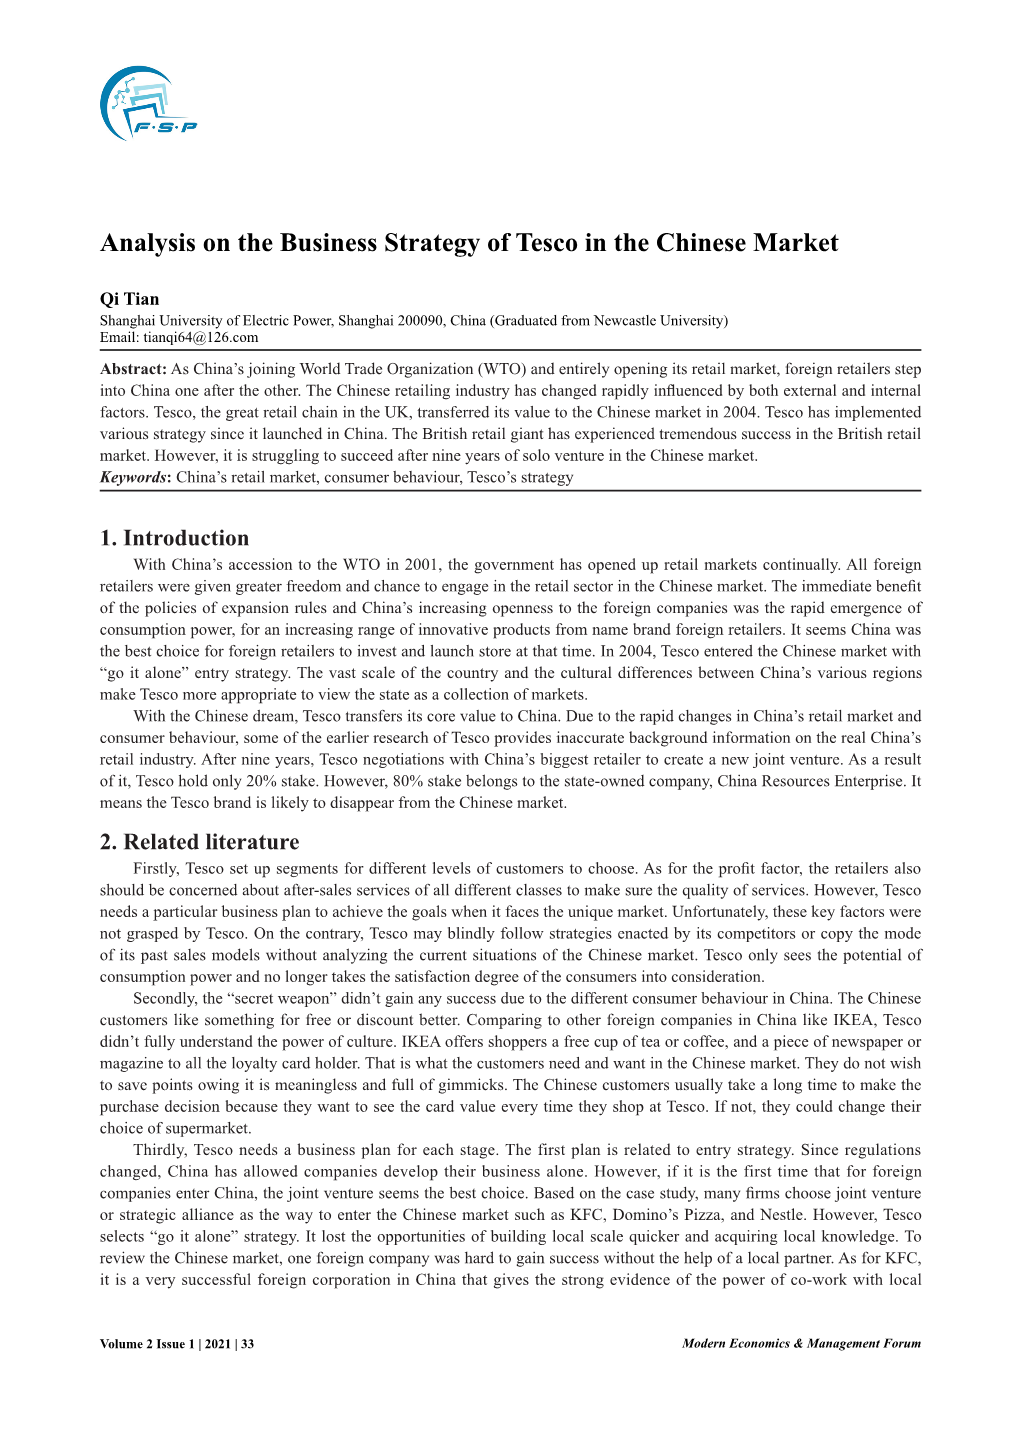 Analysis on the Business Strategy of Tesco in the Chinese Market